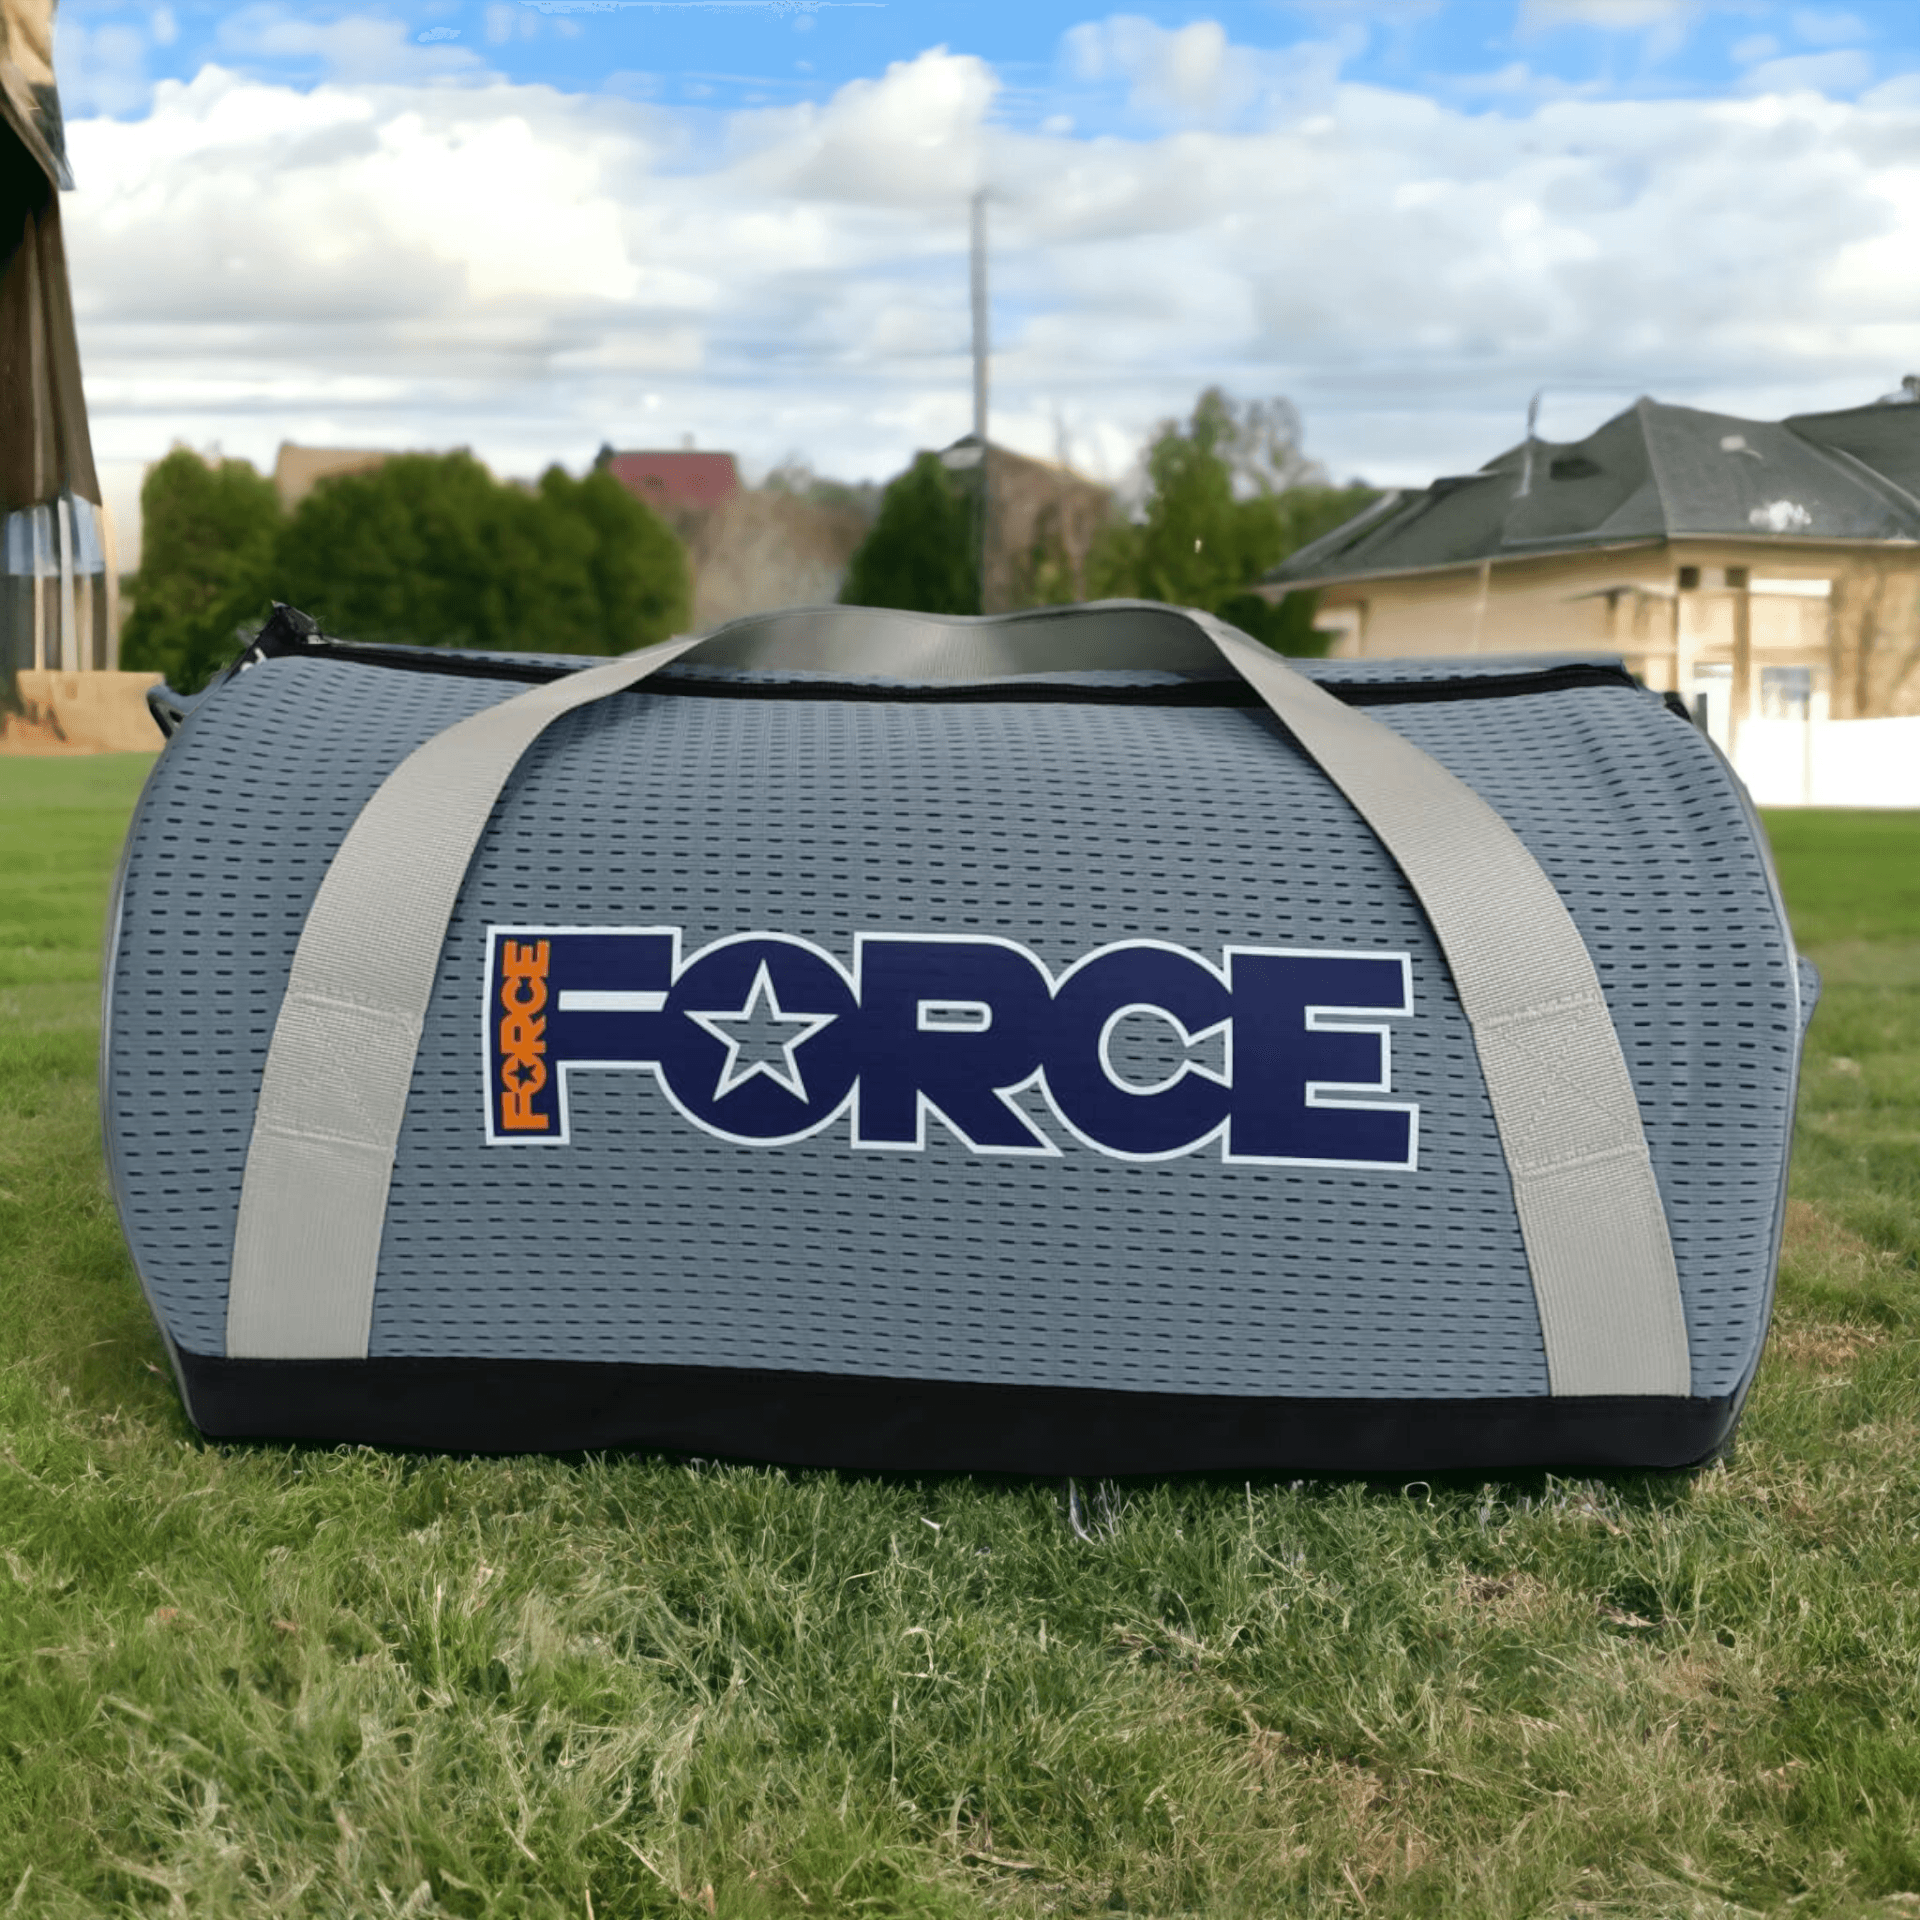 FORCE Sports Bag Mesh - GRAY- GM-107 - FORCE STORES